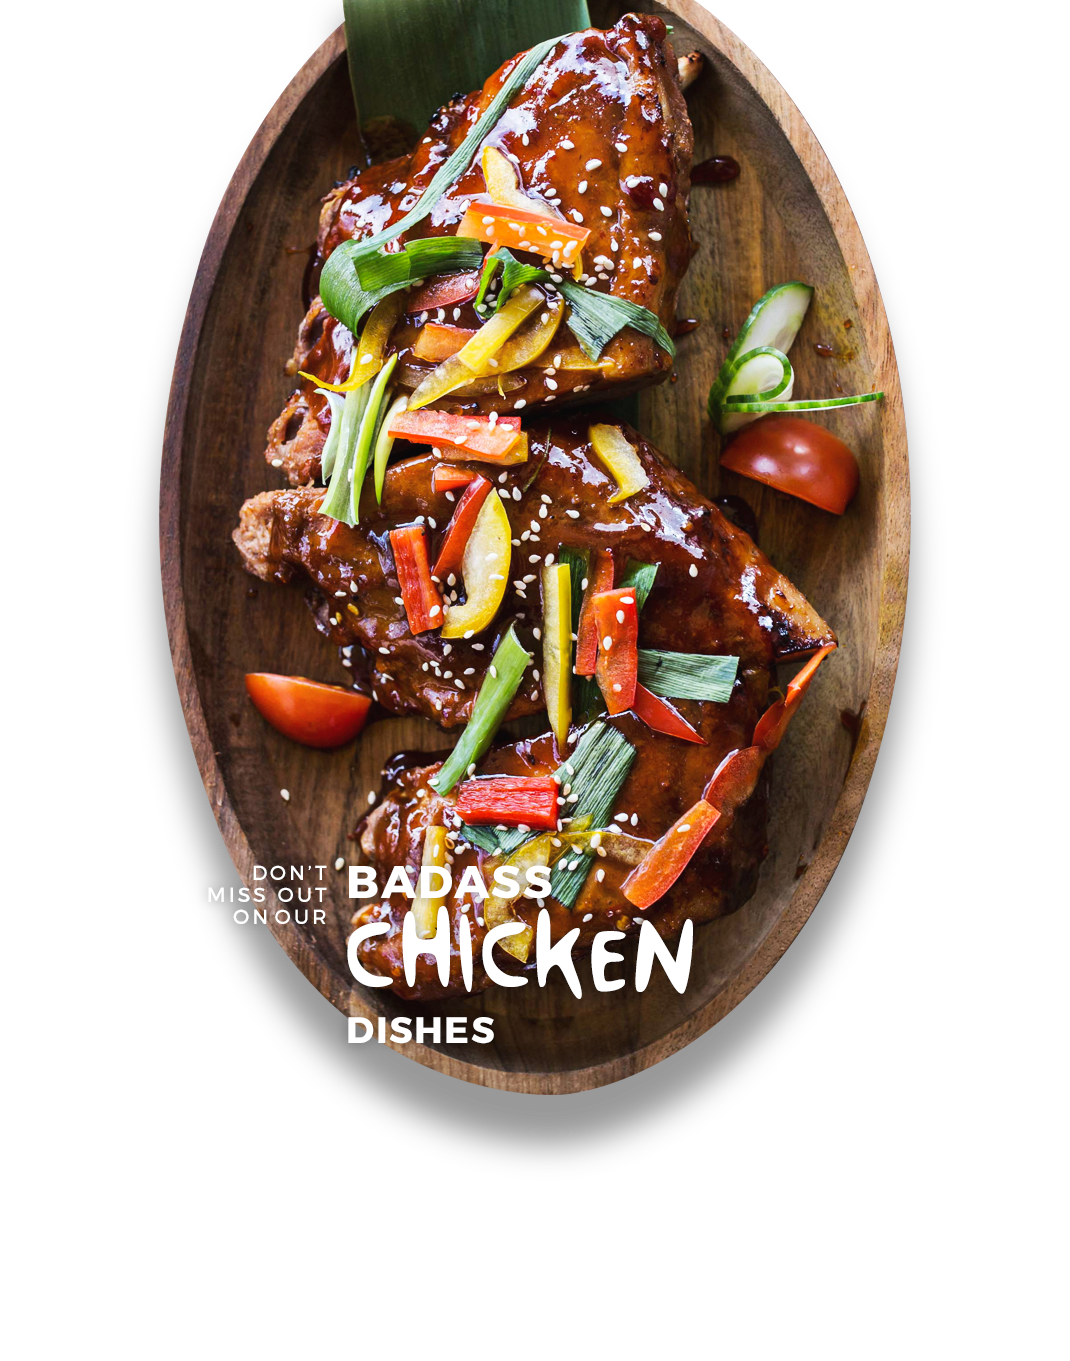 Try our chicken dishes!